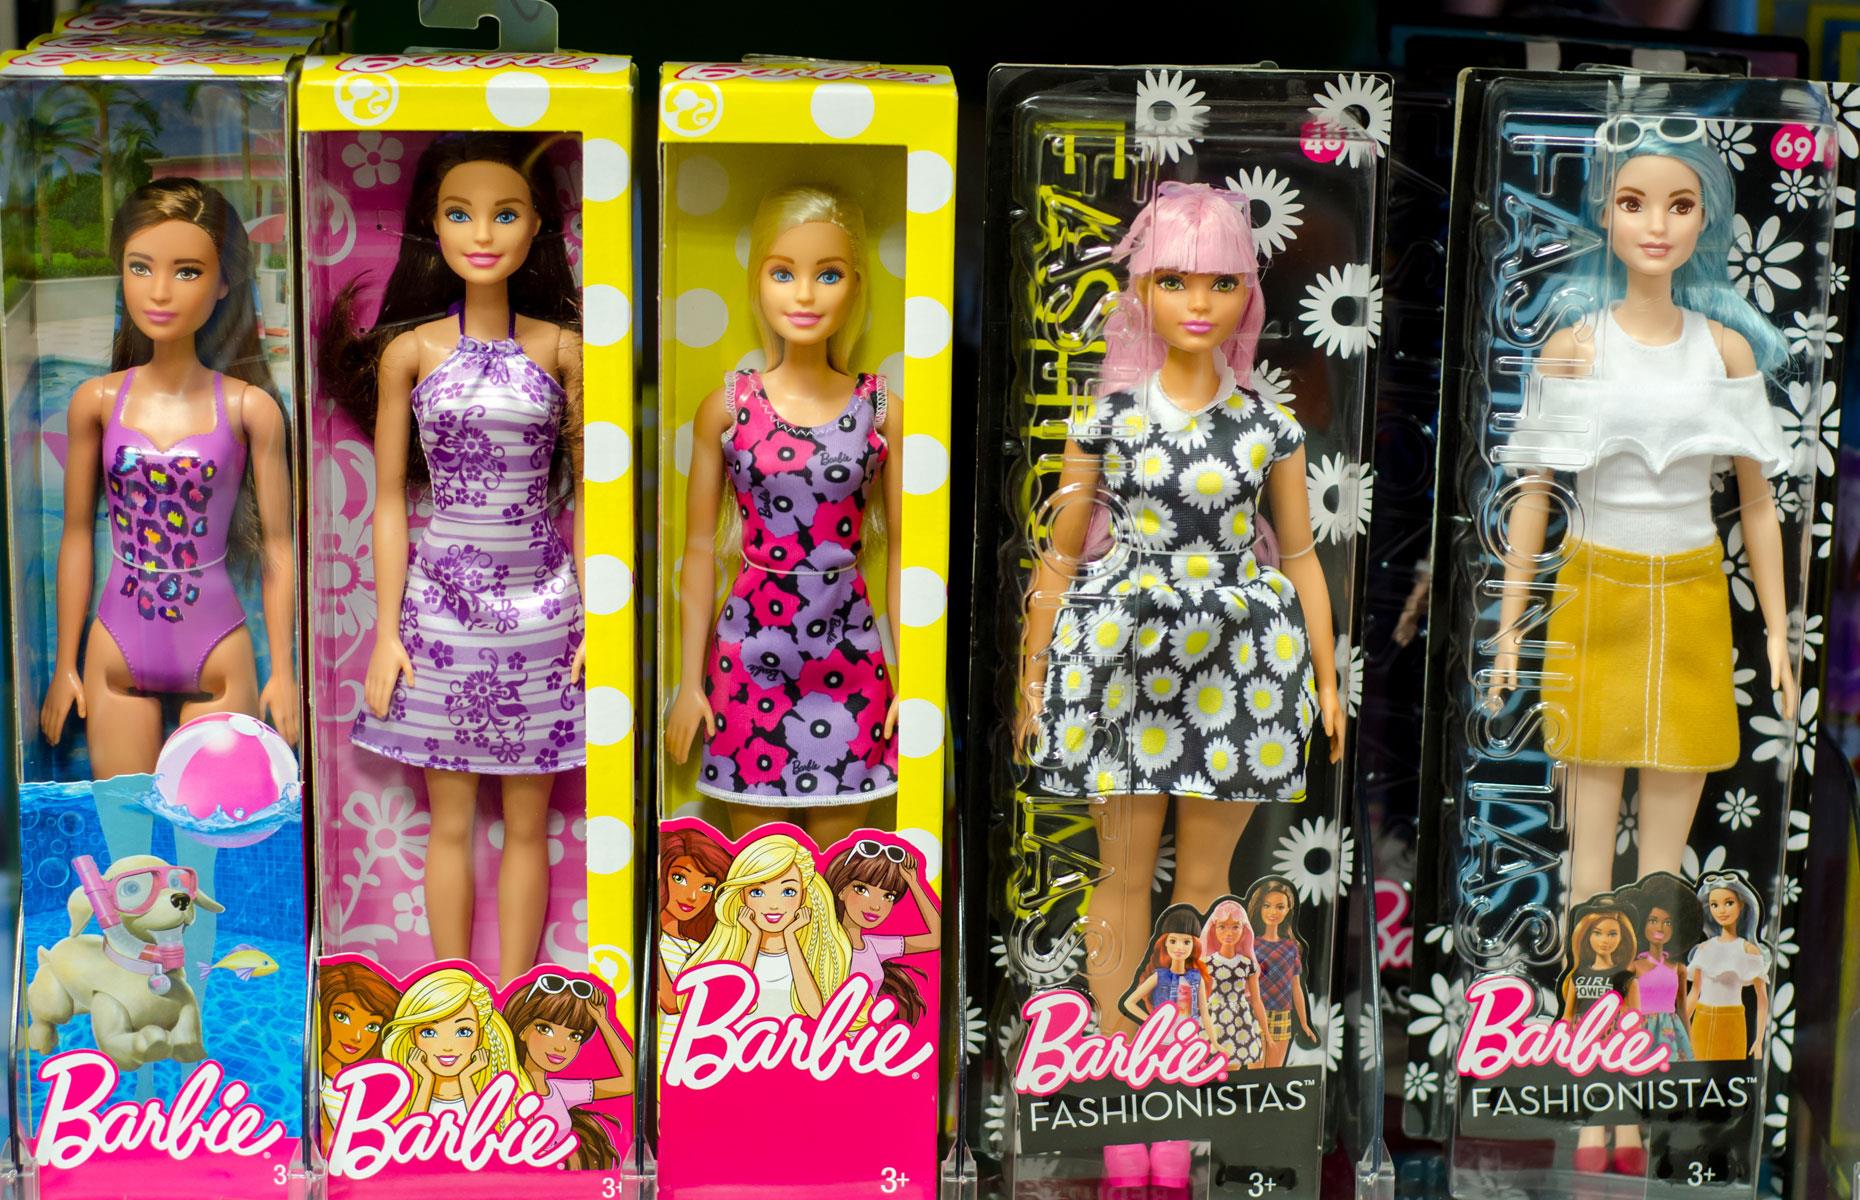 Study to find out whether girls play with Barbie dolls more than boys: $300,000